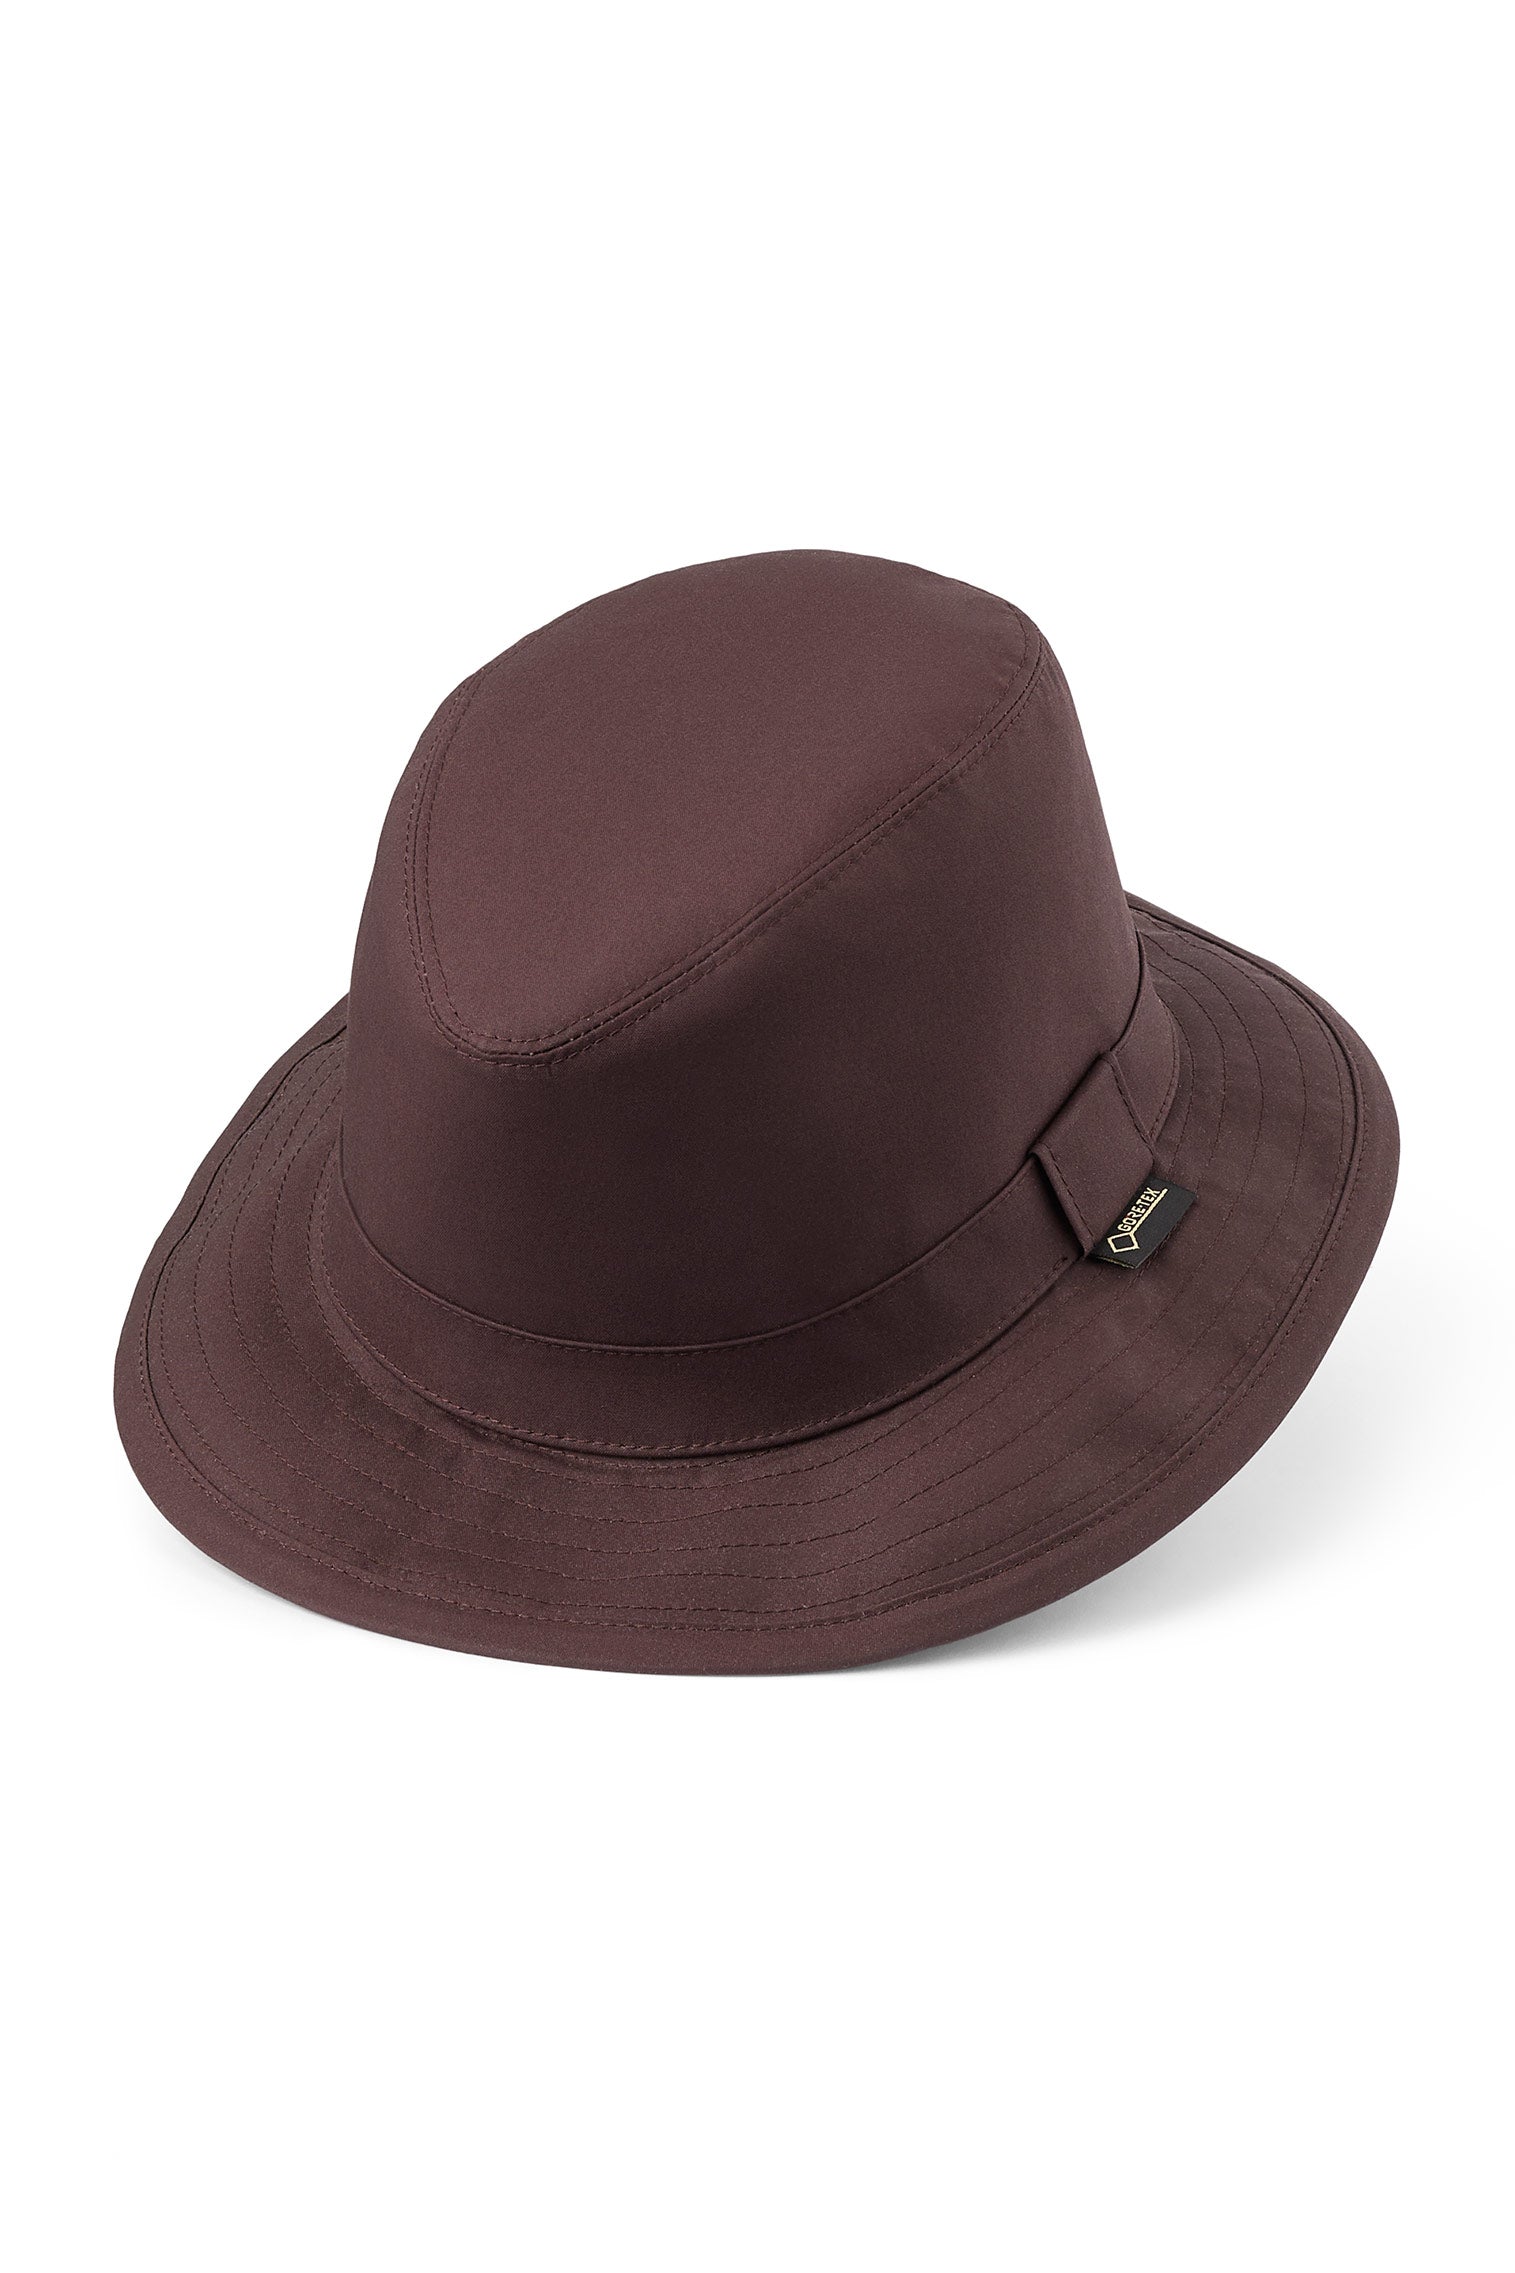 Tay GORE-TEX Hat - Hats for Long Face Shapes - Lock & Co. Hatters London UK